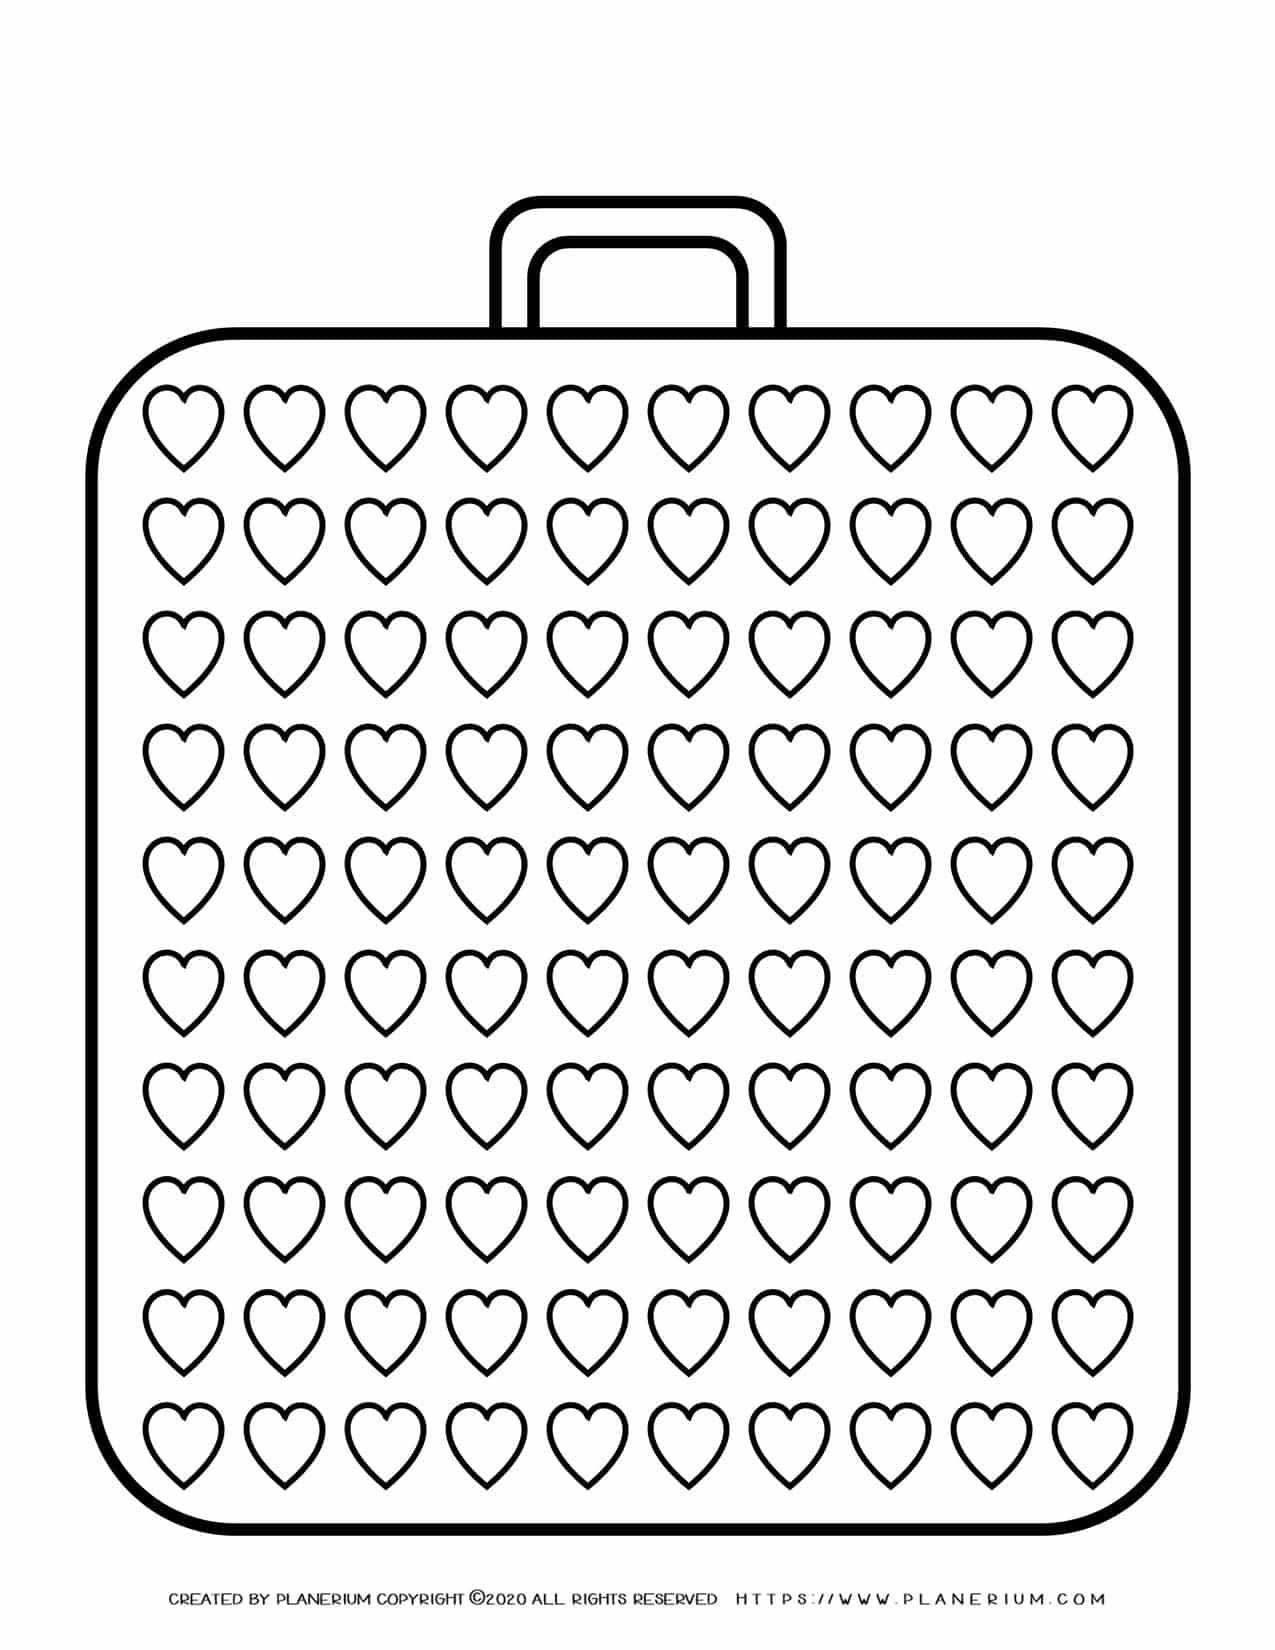 Templates - Big Suitcase With a Hundred Hearts | Planerium